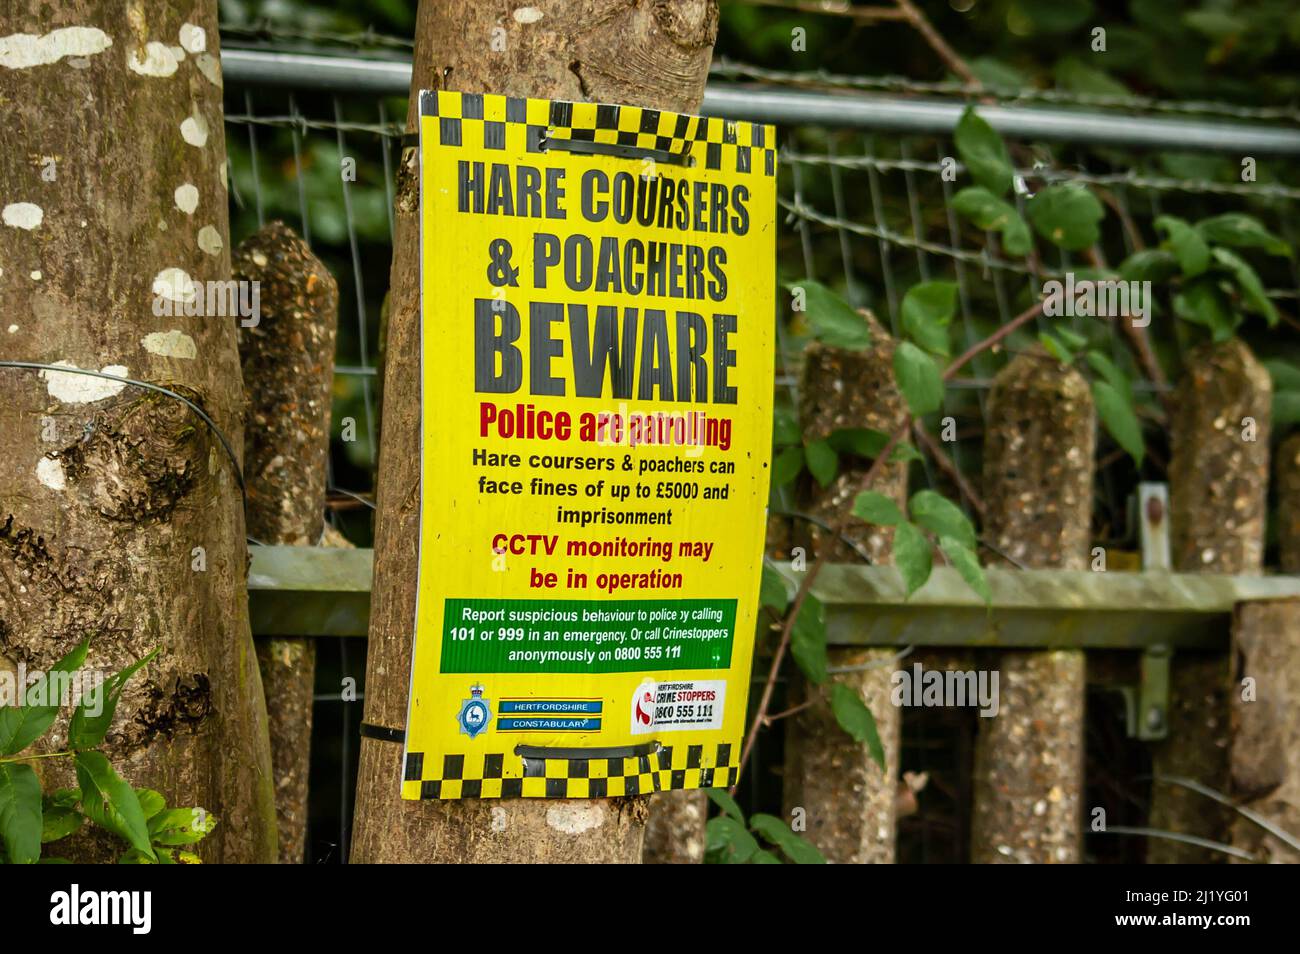 ELSTREE, LONDON, ENGLAND- 17 October 2021: 'Hare coursers and poachers beware' poster in the countryside in Elstree, England Stock Photo